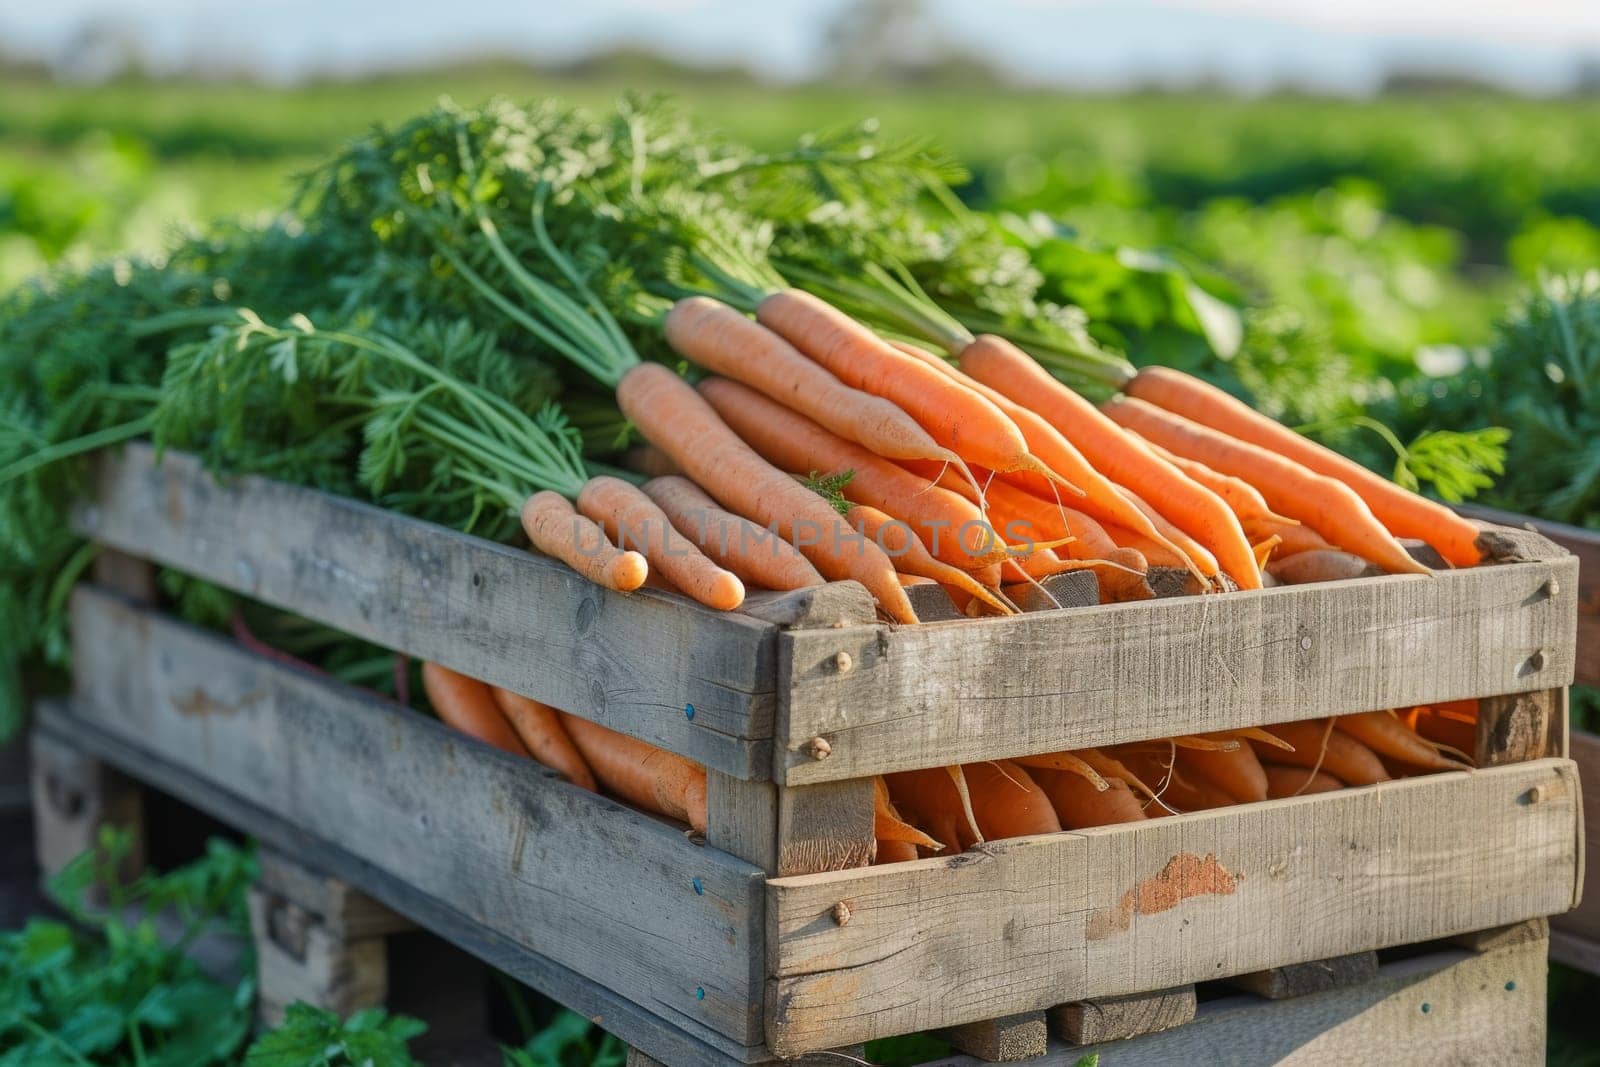 Bunch of freshly picked carrots in a farm.